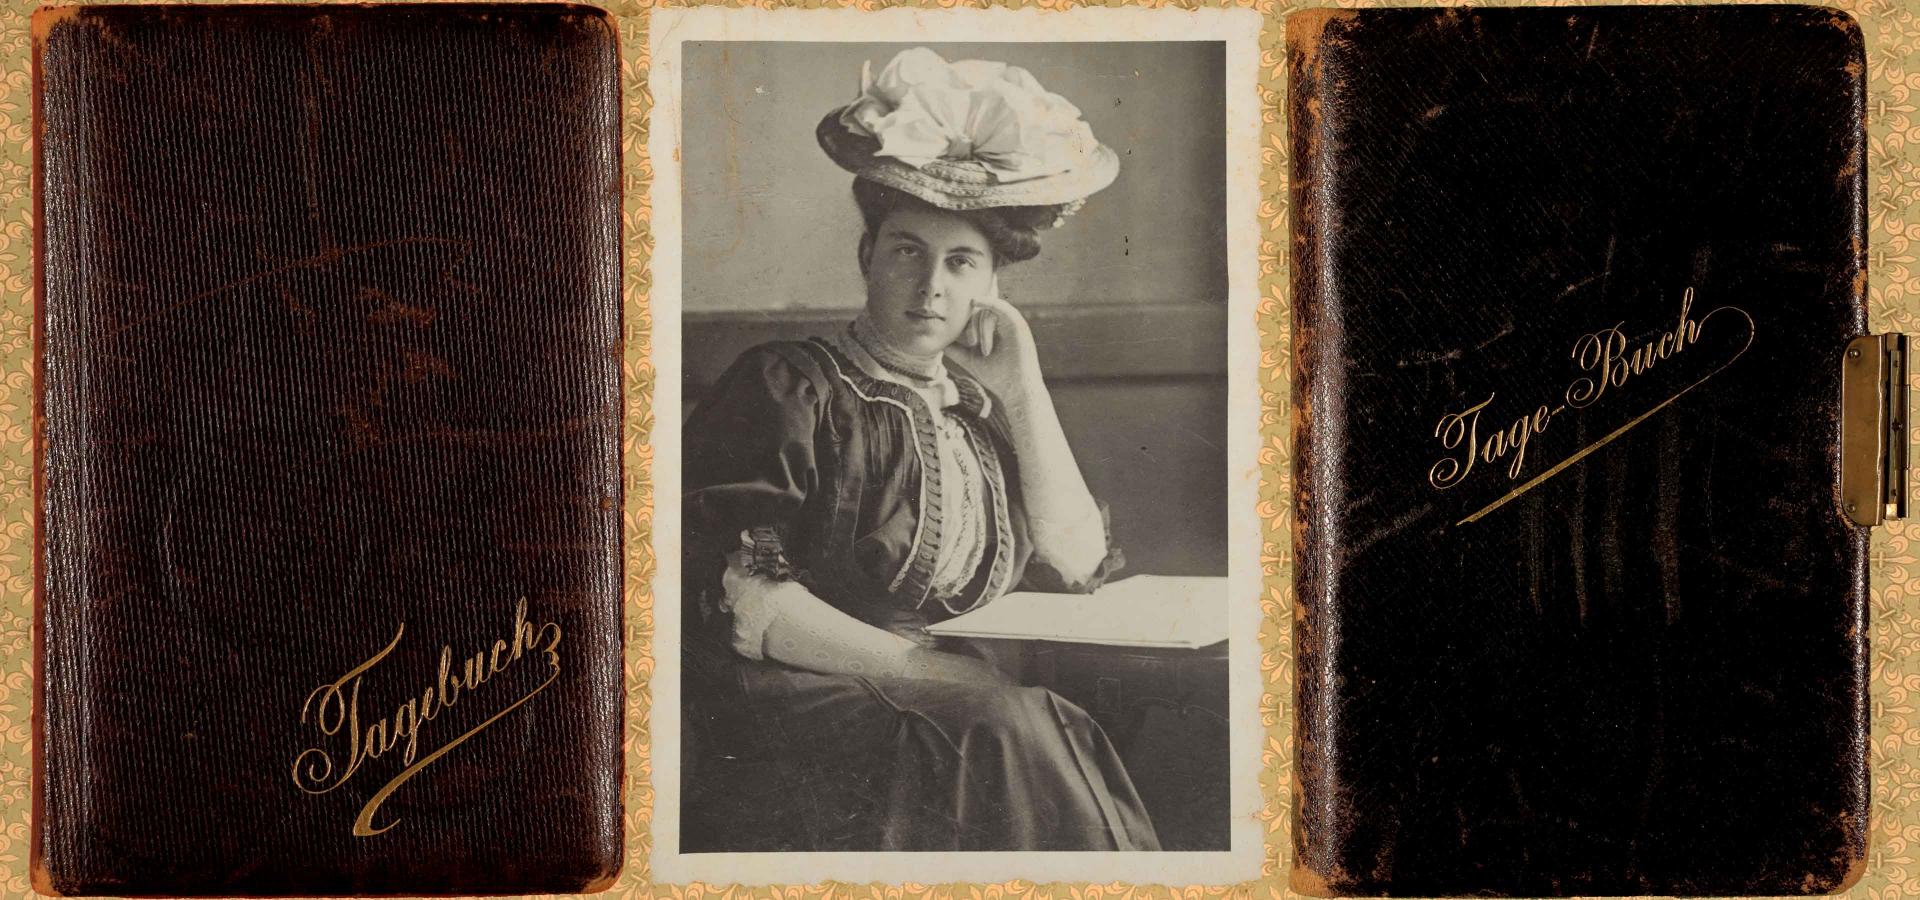 Cover of a diary, center: black and white portrait photo of a young lady. She wears a high-necked dress with hat in the style of the 1910s. Right: cover of a worn diary with leather binding and the golden lettering “Tage-Buch” (diary).